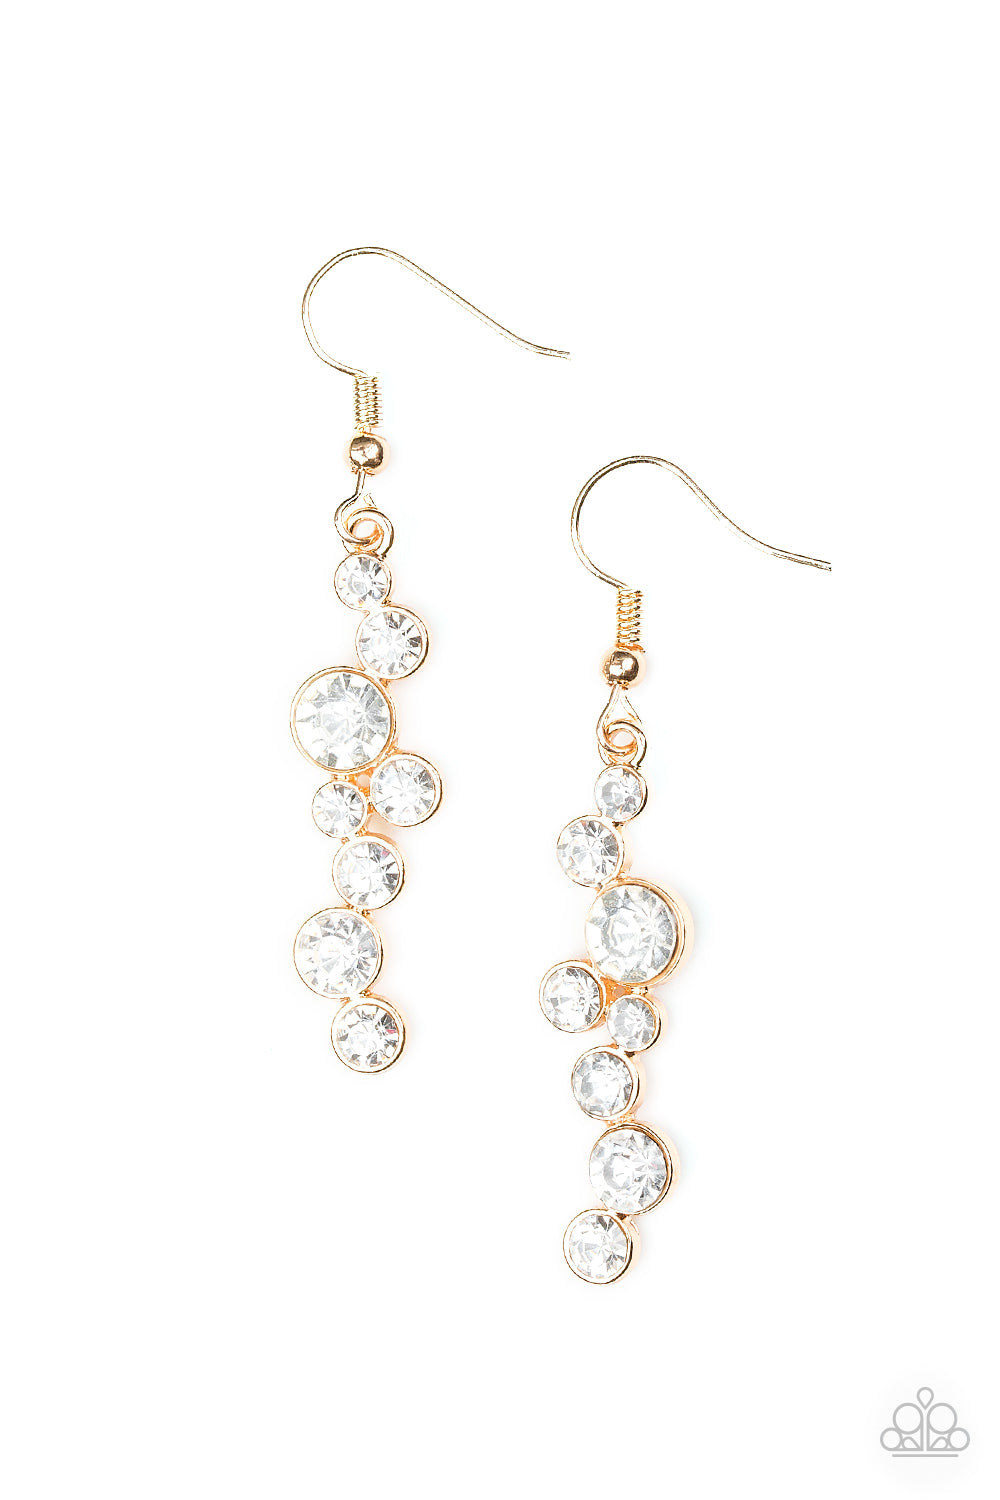 Milky Way Magnificence - gold - Paparazzi earrings